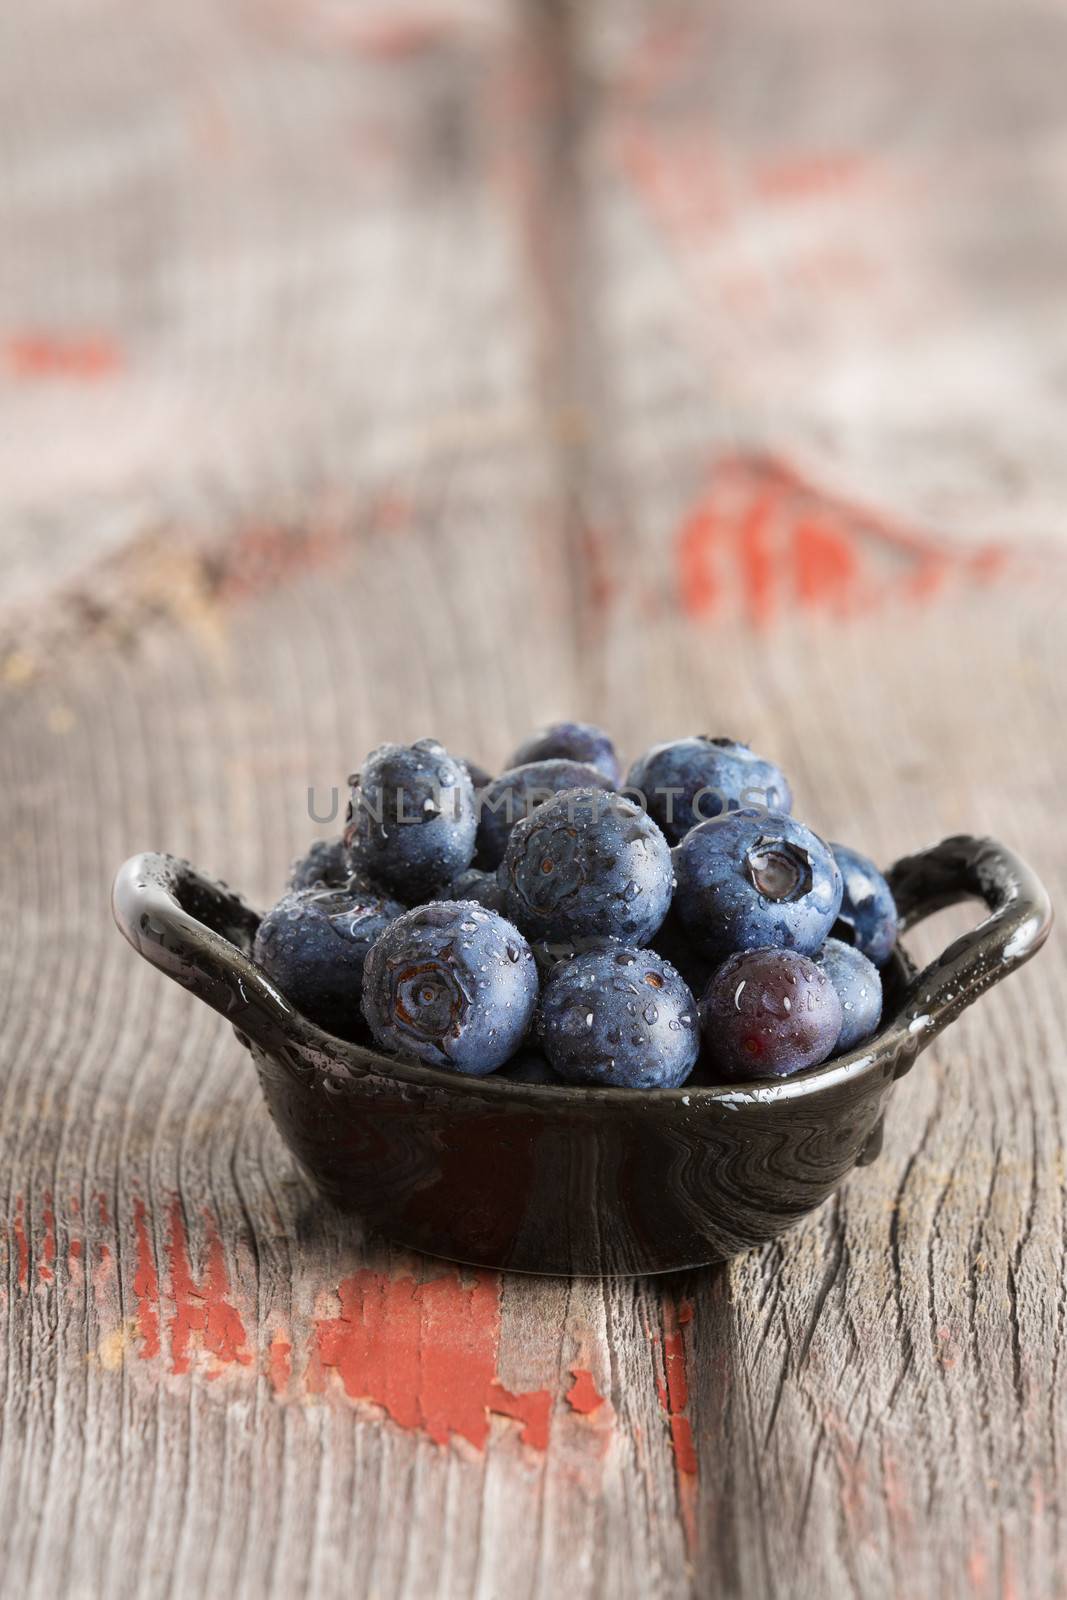 Bowl of fresh ripe autumn blueberries for a healthy diet rich in Vitamin K and antioxidants on old wooden boards in vertical format with shallow dof and copyspace